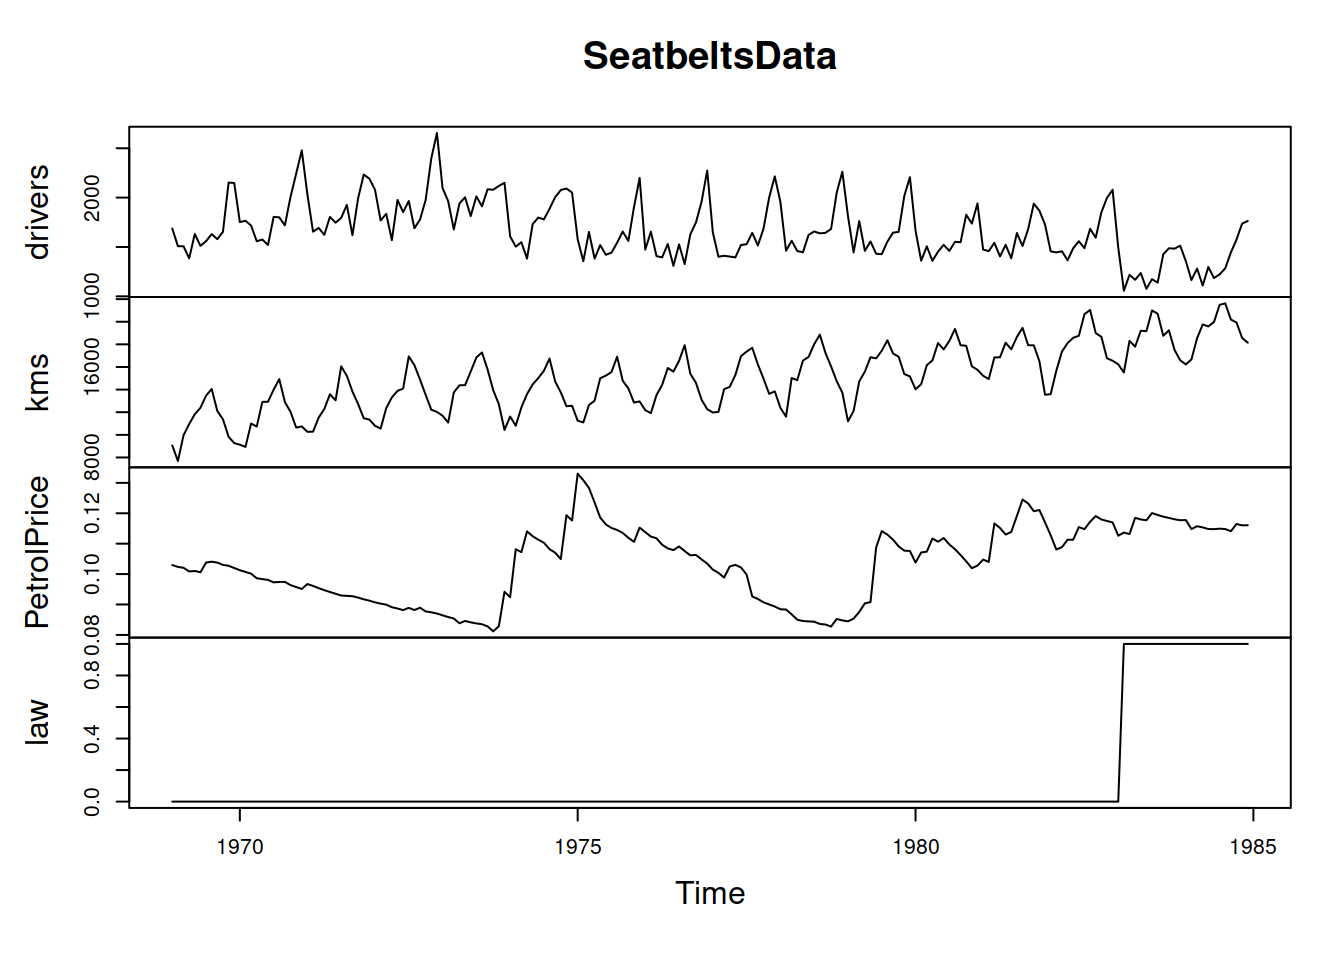 The time series dynamics of variables from Seatbelts dataset.